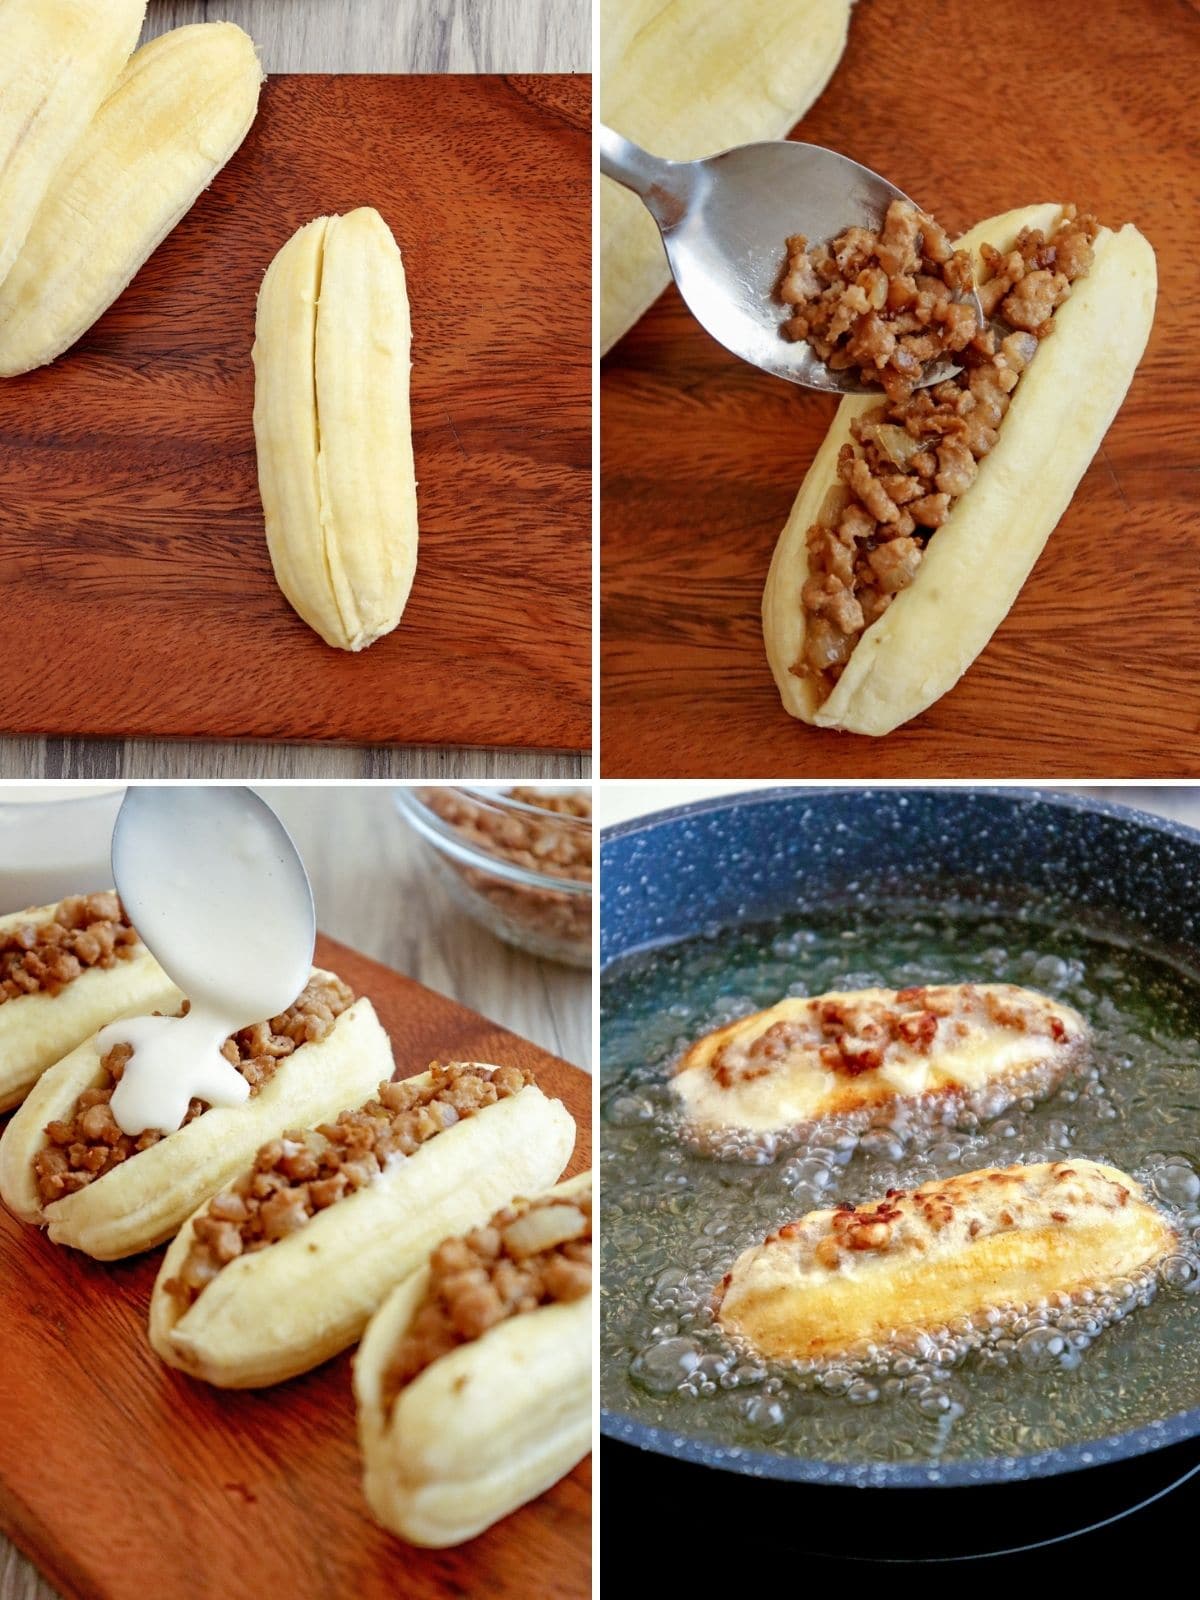 making stuffed bananas with ground pork filling